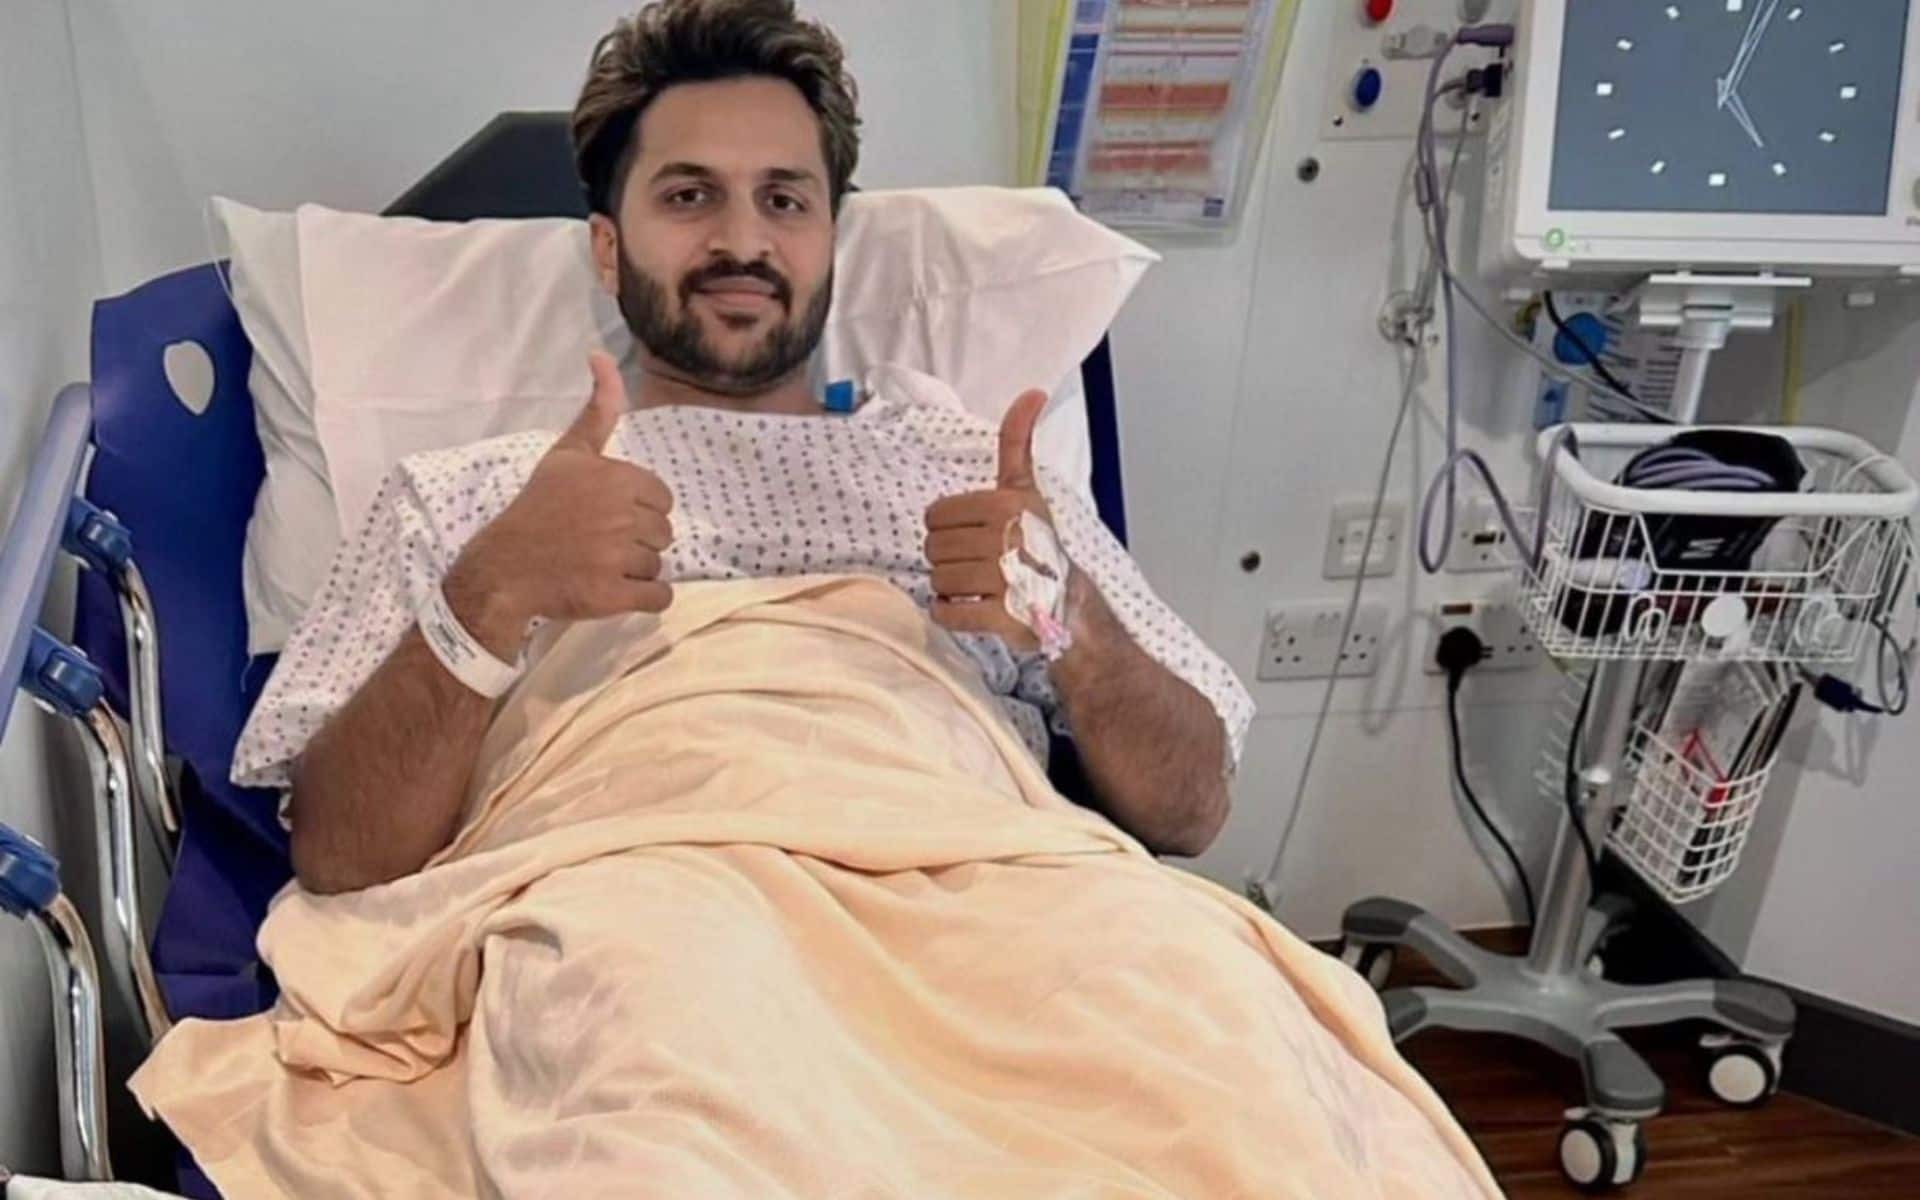 Shardul Thakur shares picture from hospital bed following ankle surgery (X.com)